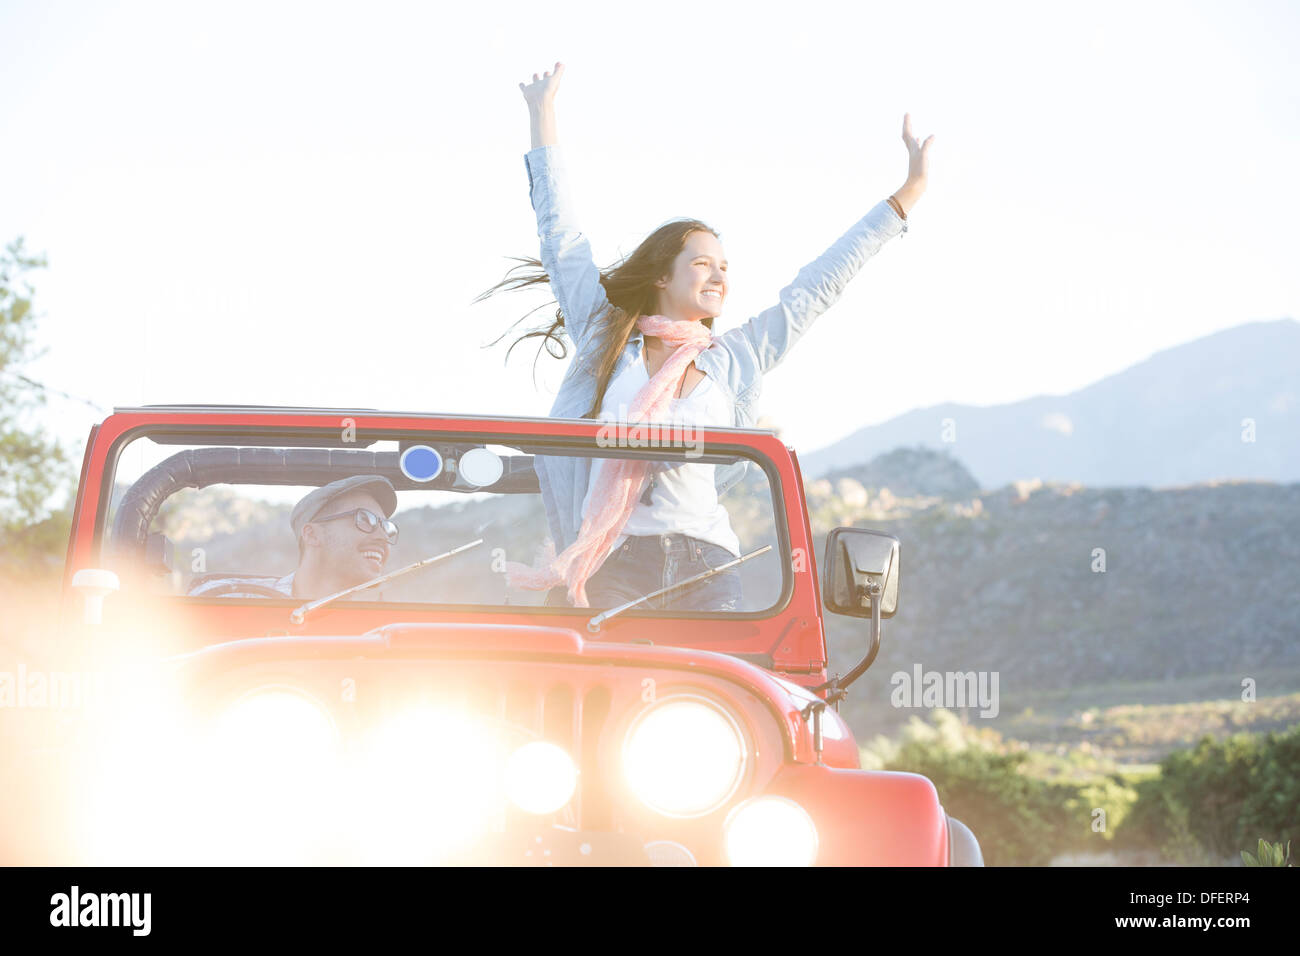 Woman cheering in sport utility vehicle Stock Photo